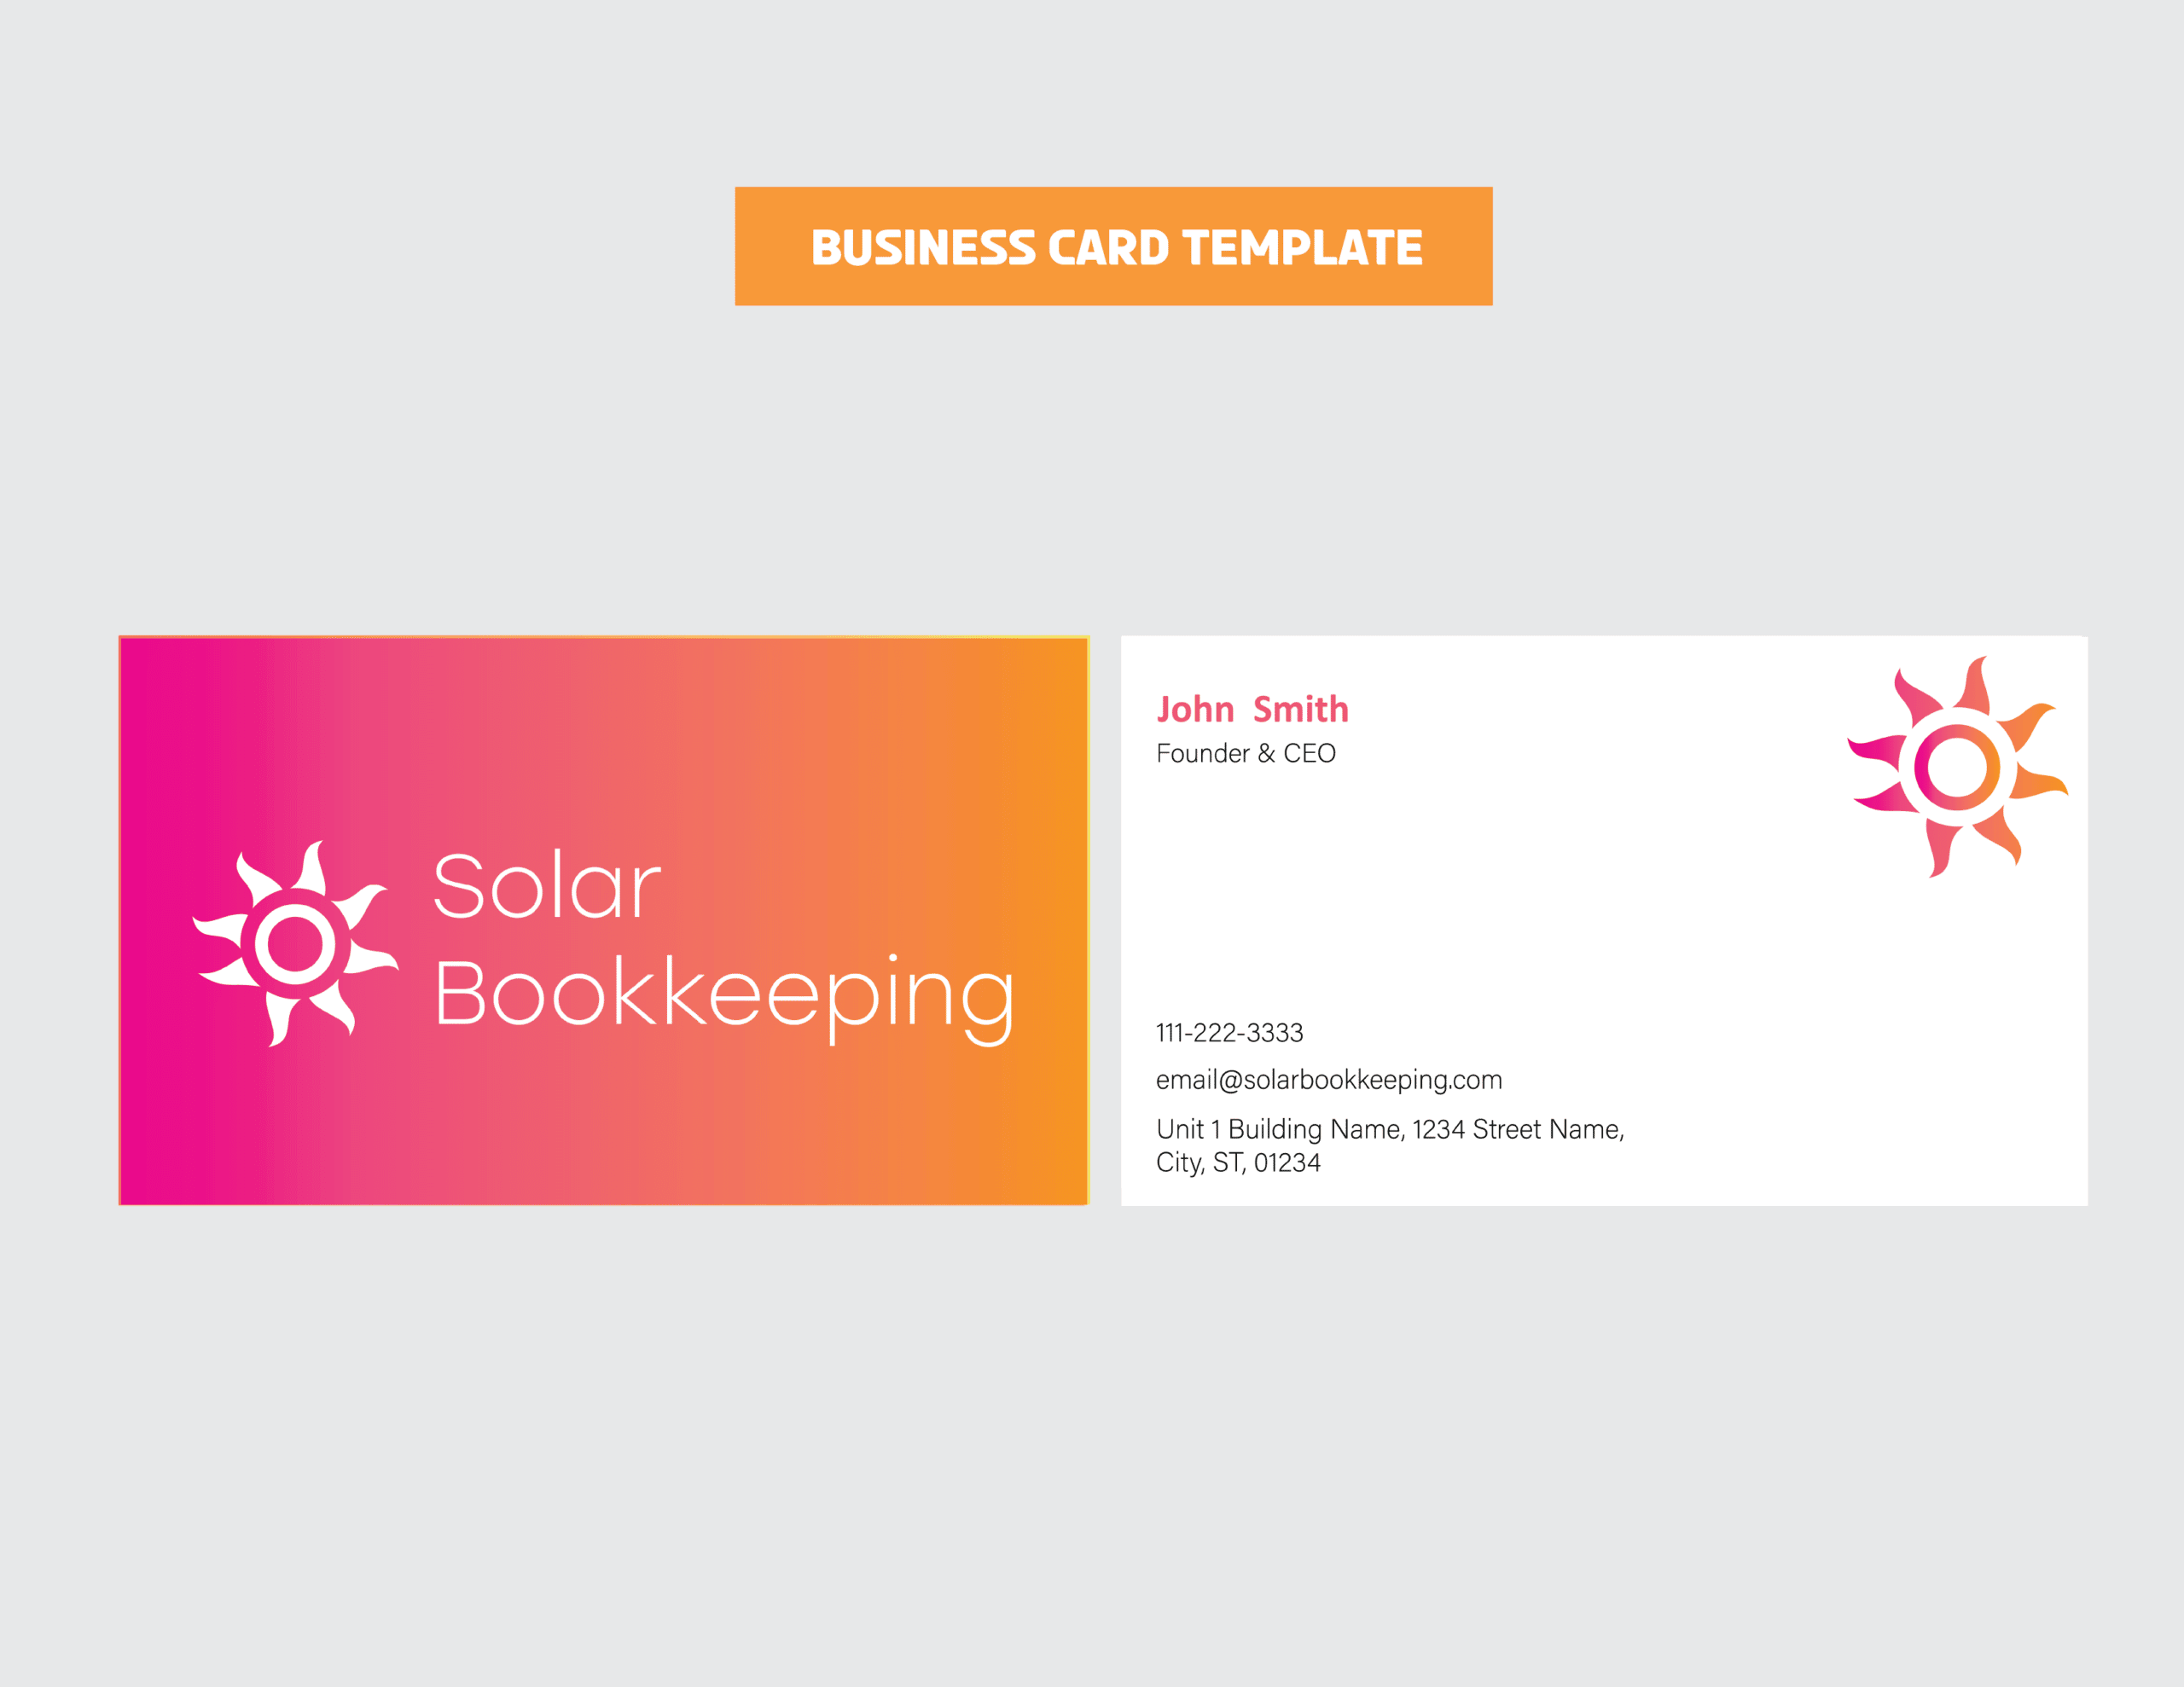 04_SolarBookkeeping_Business Card Template